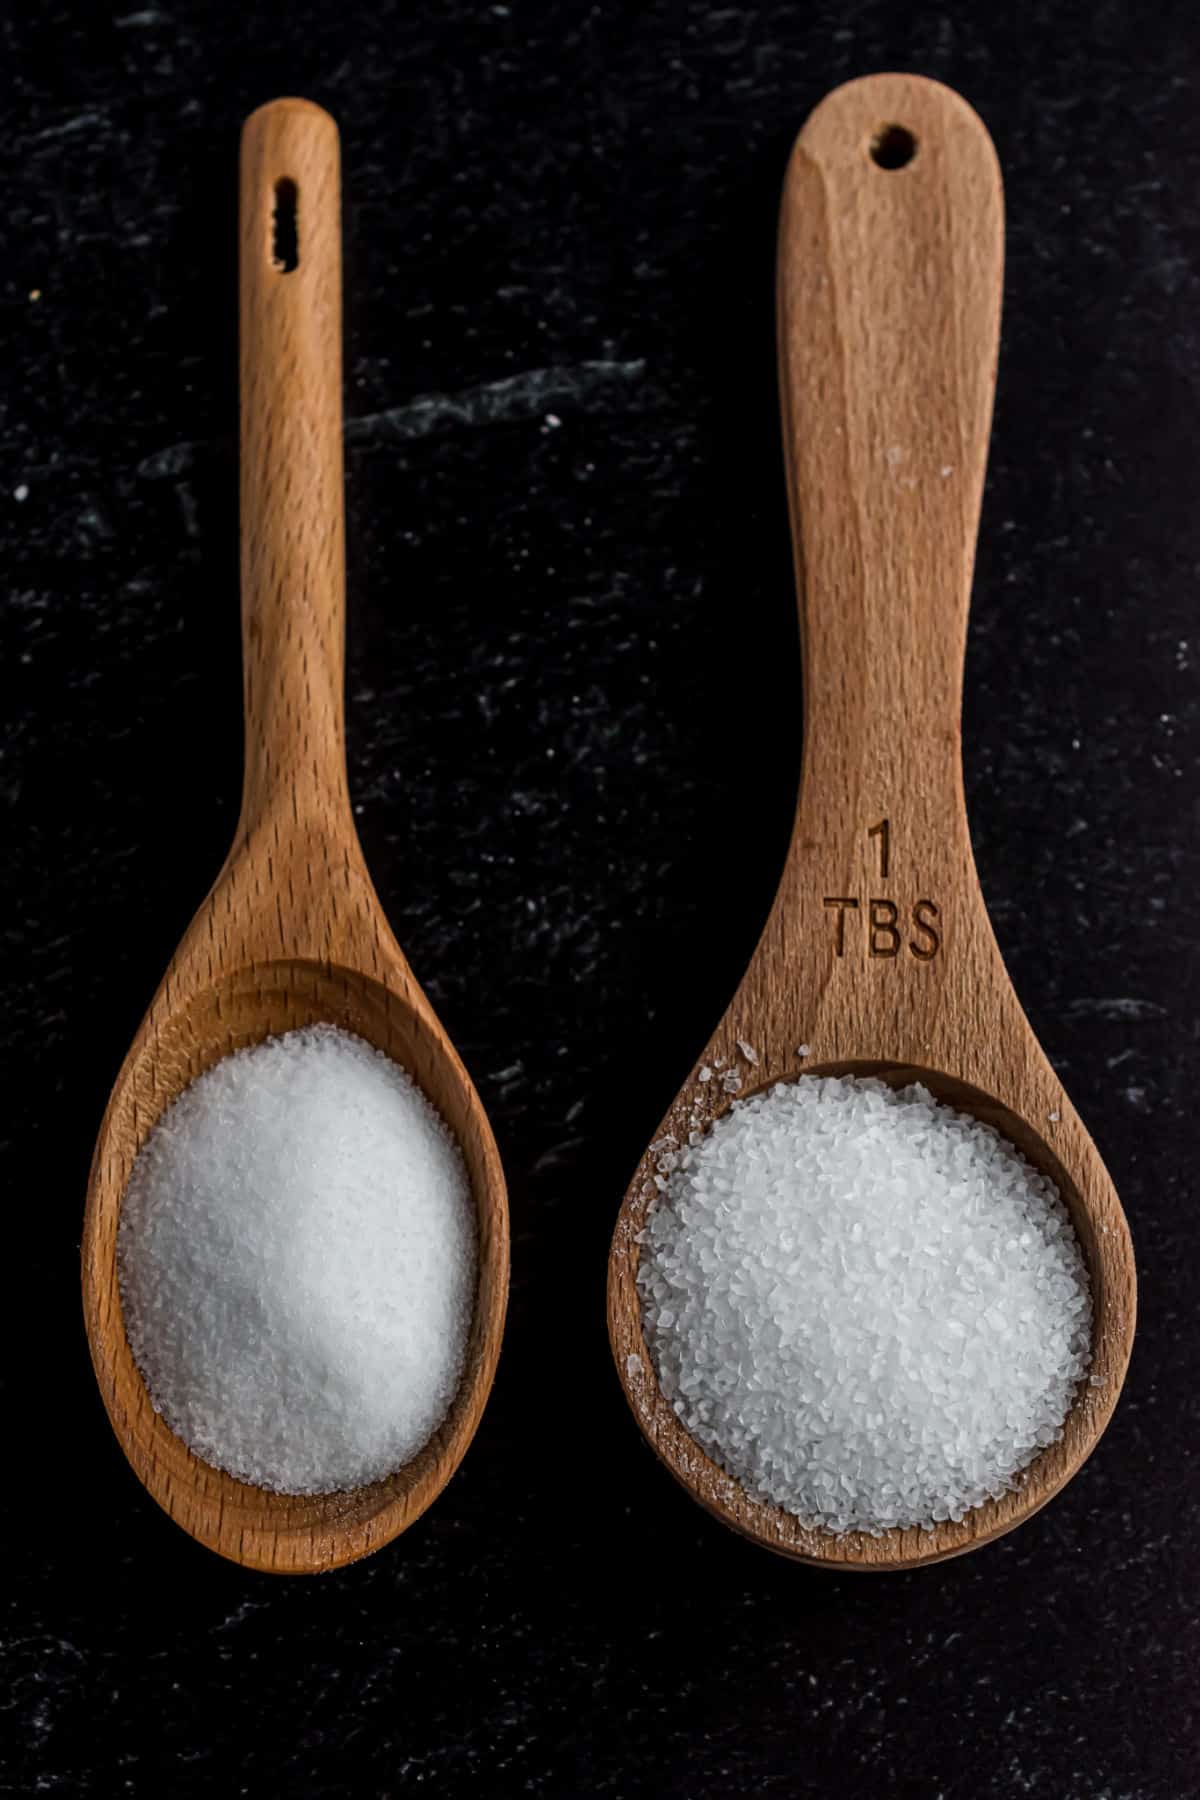 Two wooden spoons showing the difference between table salt and kosher salt.